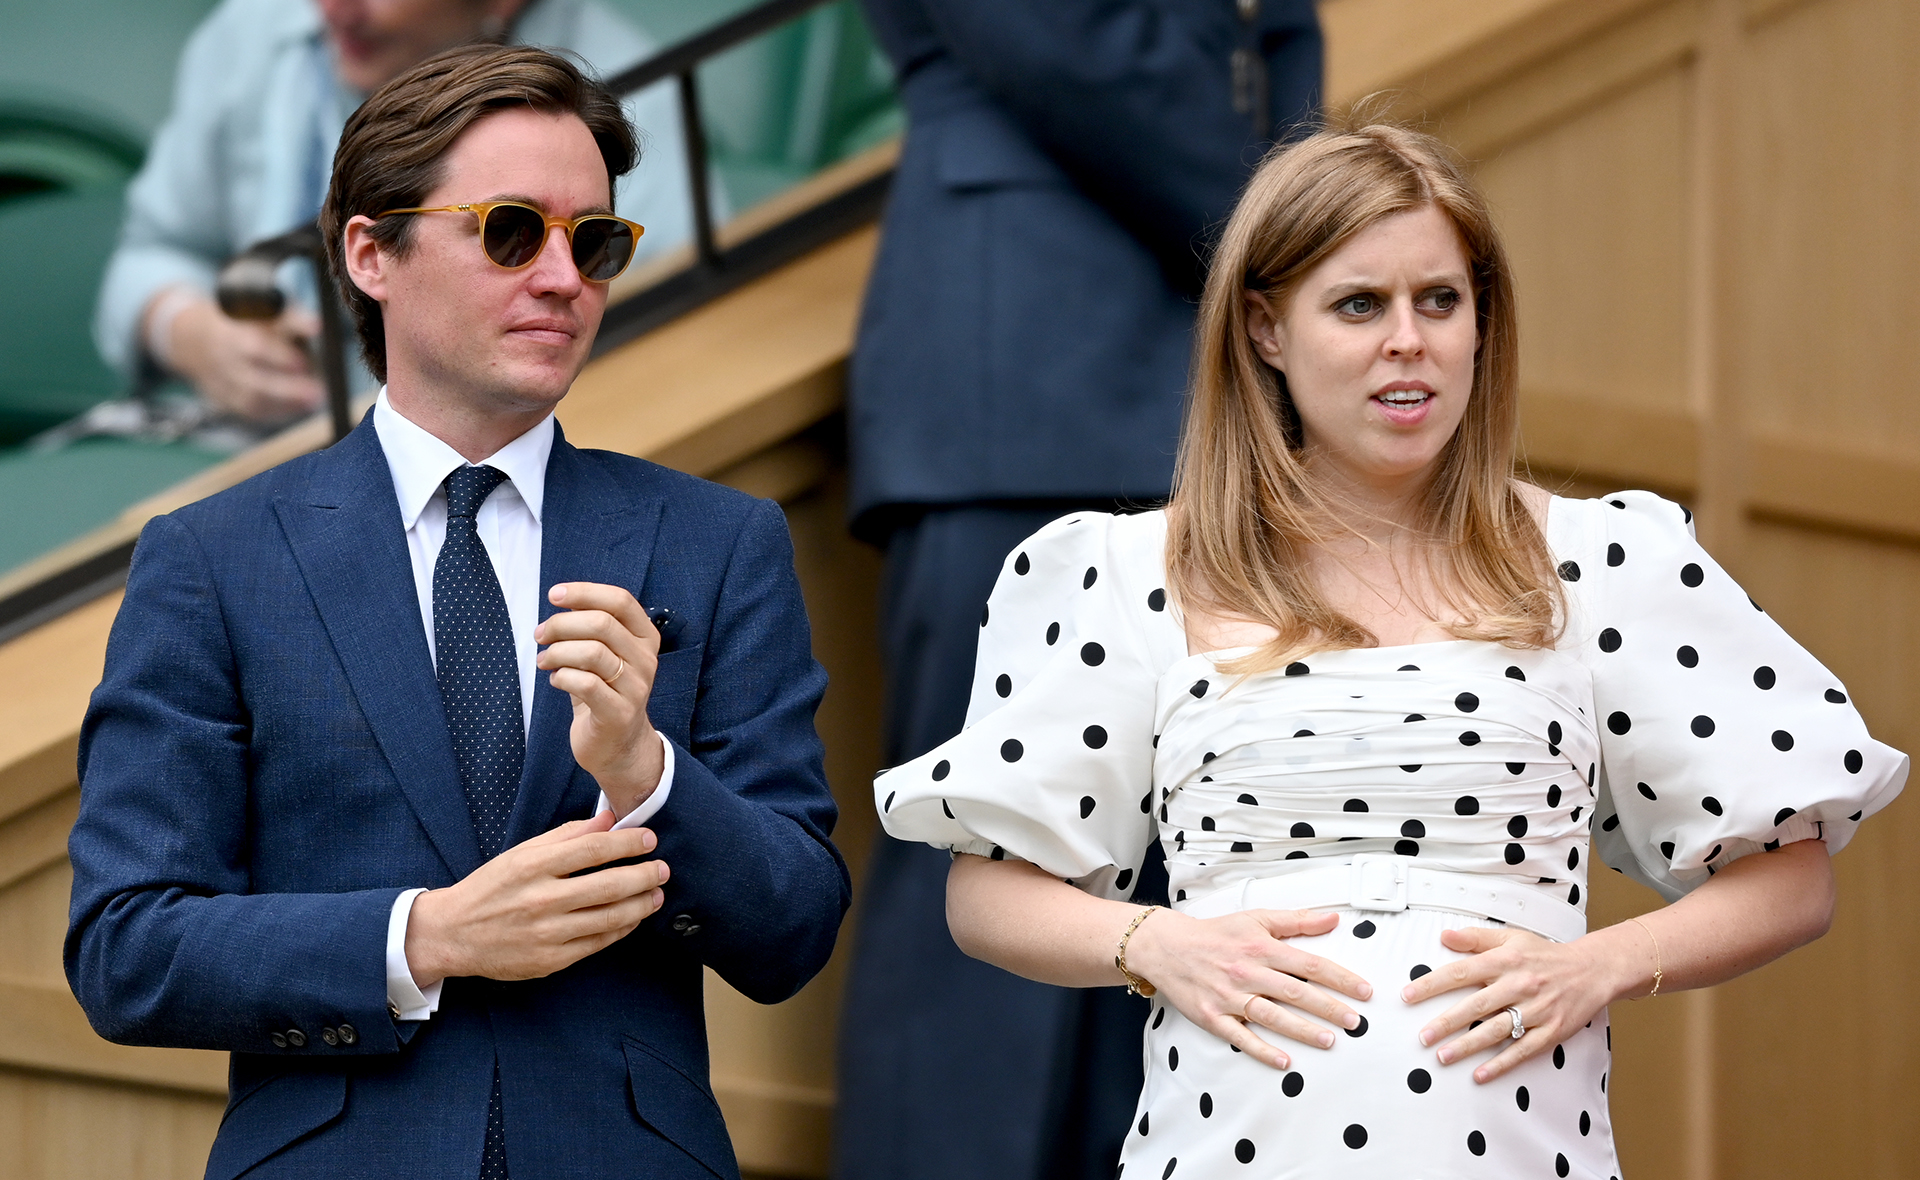 Is Princess Beatrice about to give birth? Reports flood in that she’s been admitted to hospital